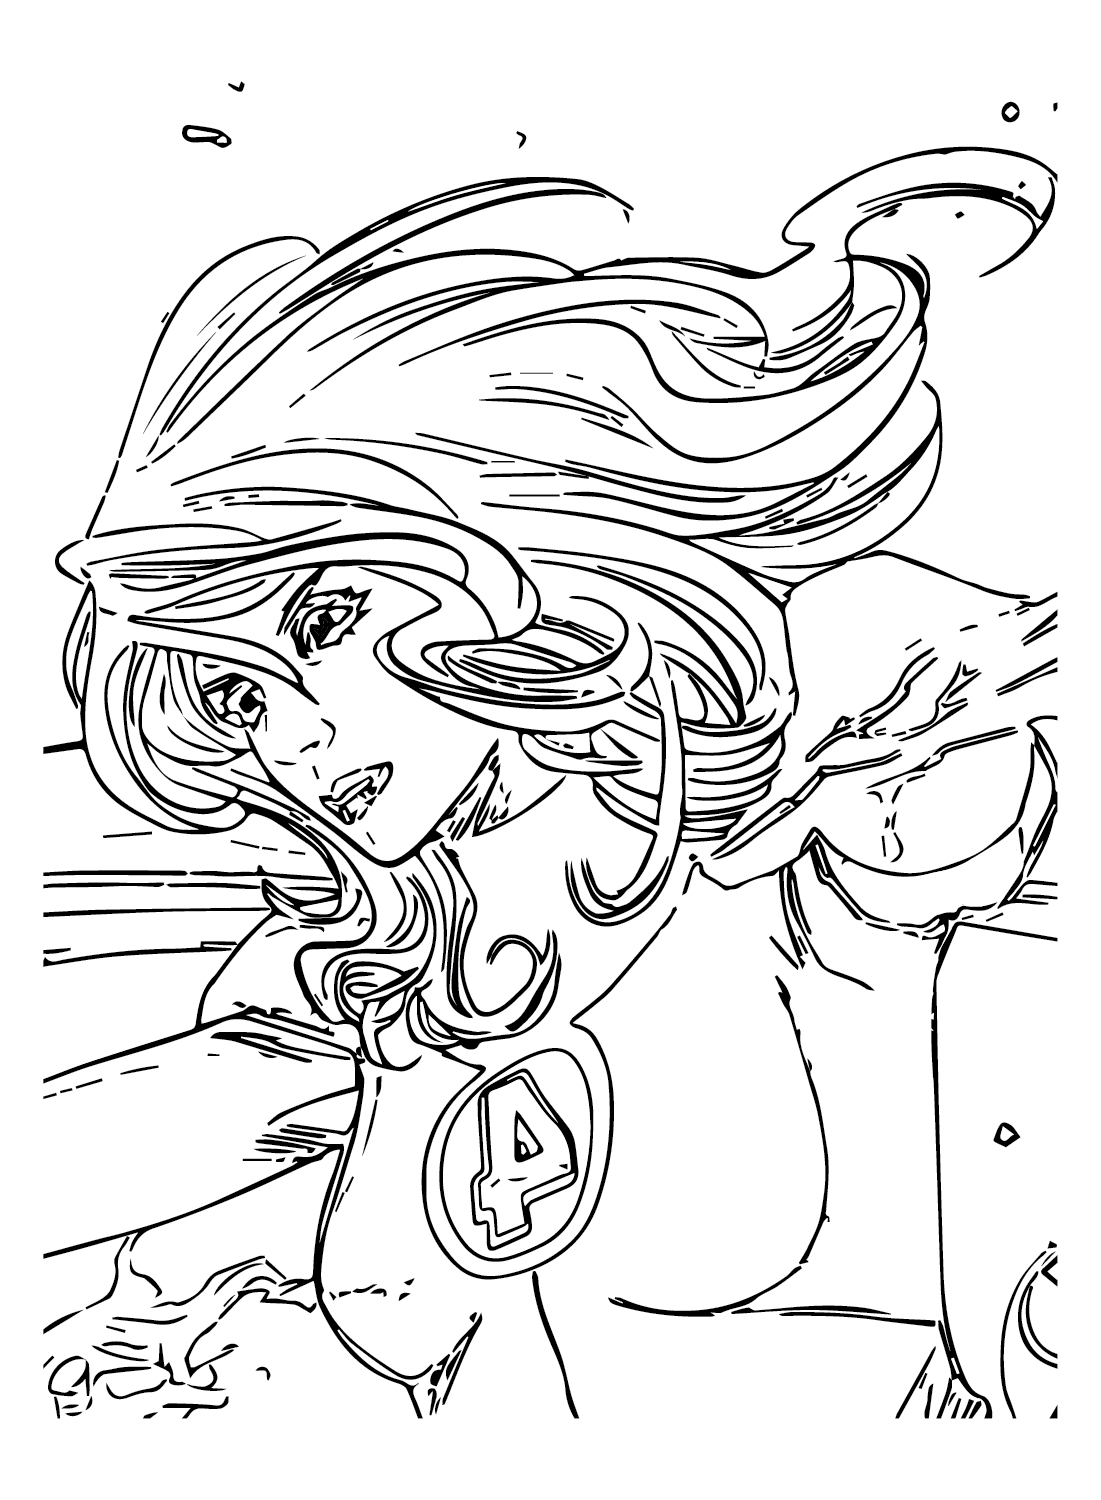 Invisible Woman can Paint Coloring Page